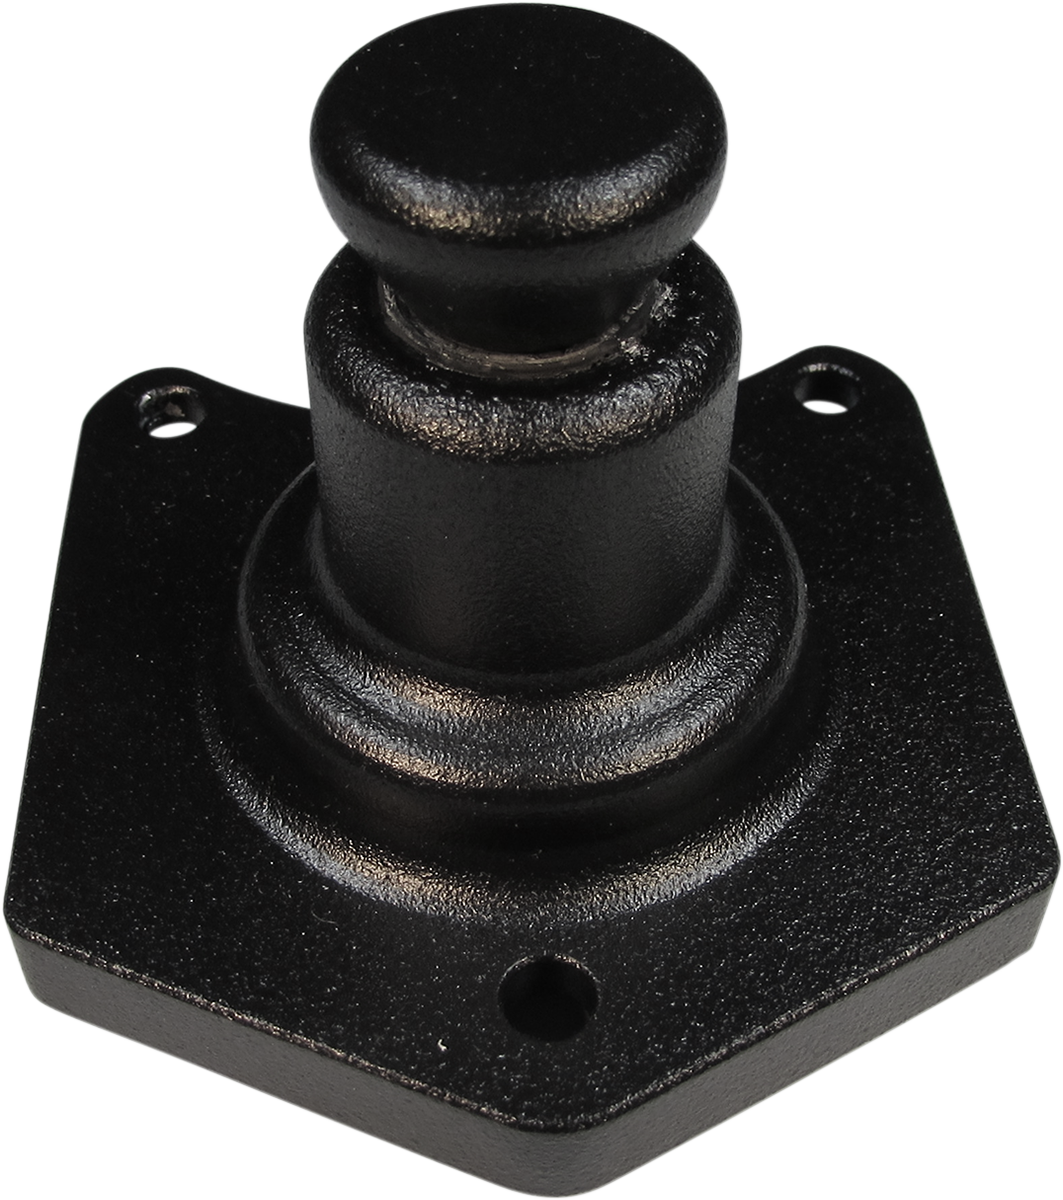 2110-0546 - TERRY COMPONENTS Solenoid End Cover - Starter Buttons - Black 550015